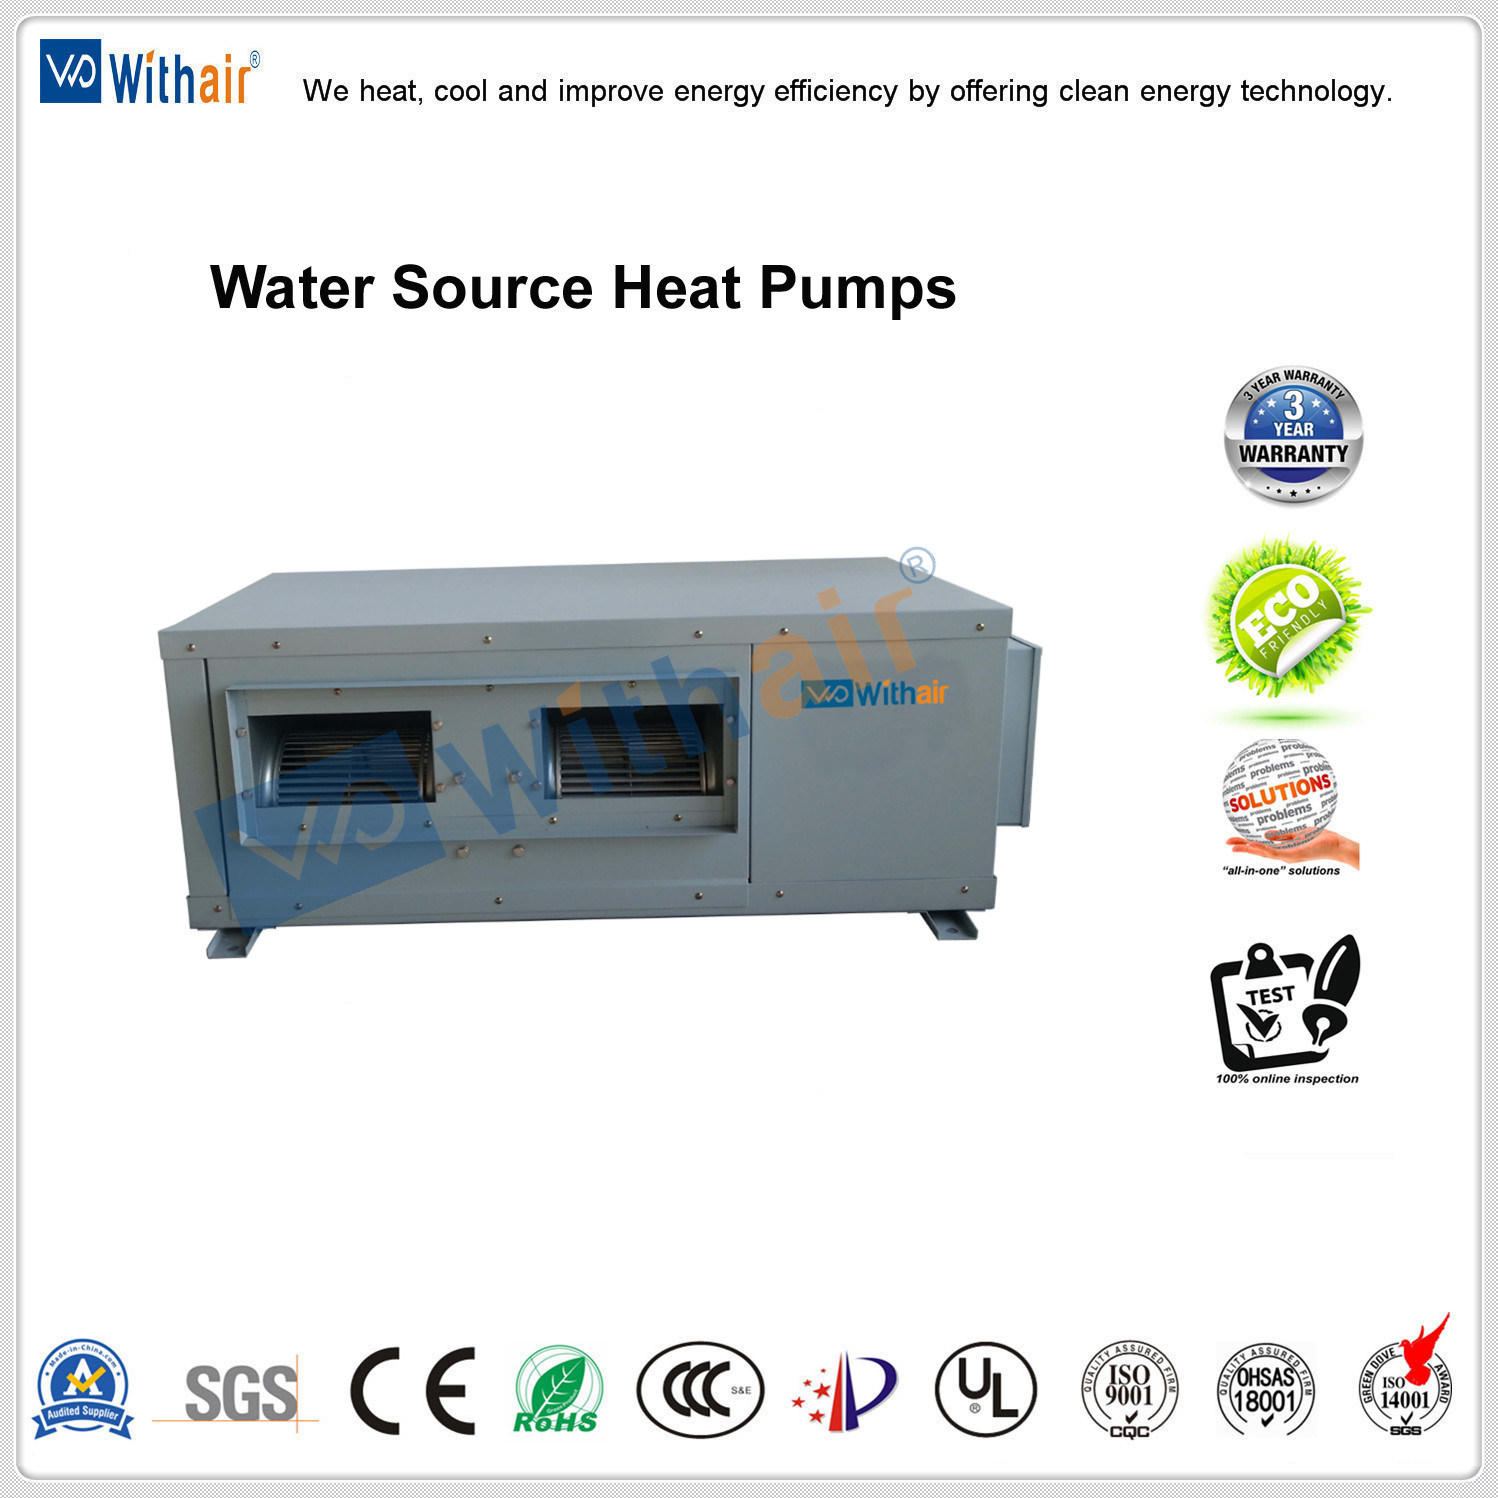 Water Cooled Packaged Unit (Heat Pump)